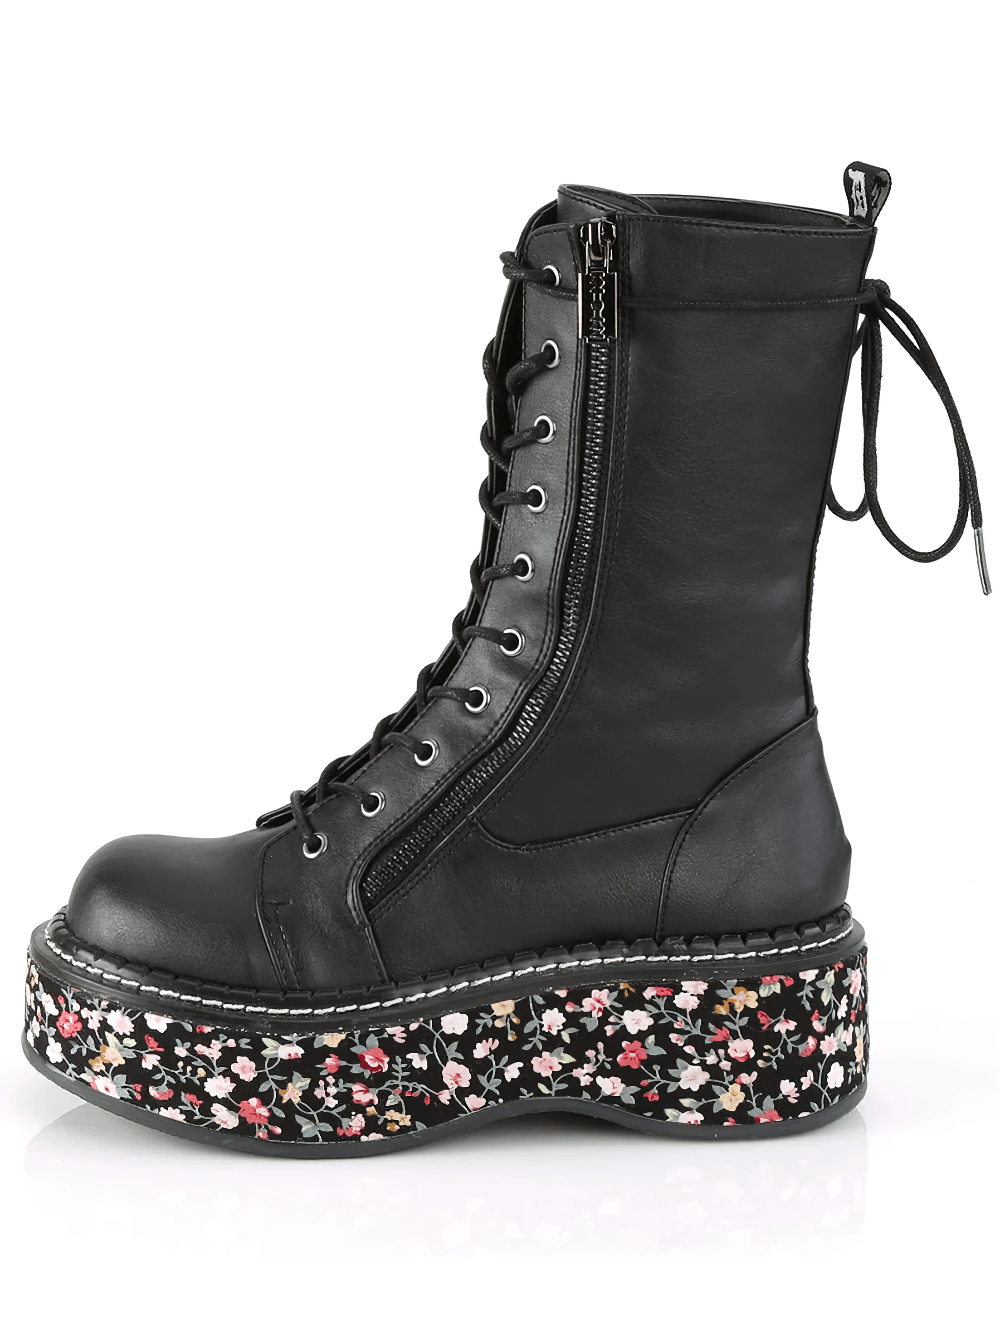 DEMONIA Gothic Mid-Calf Boots with Floral Platform and Zip